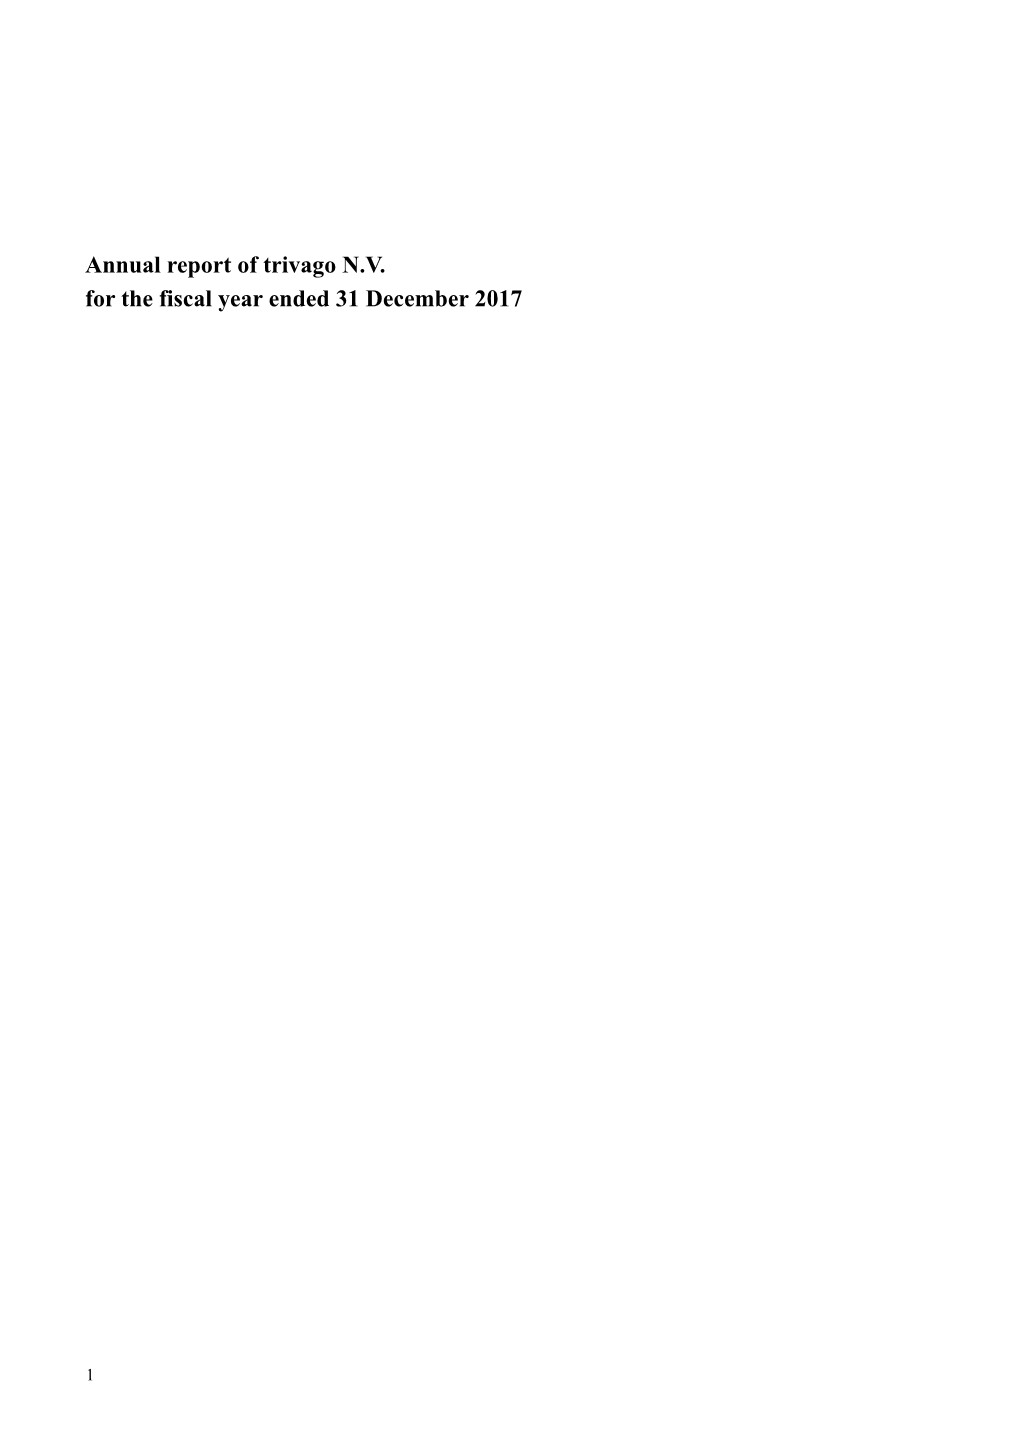 Annual Report of Trivago NV for the Fiscal Year Ended 31 December 2017